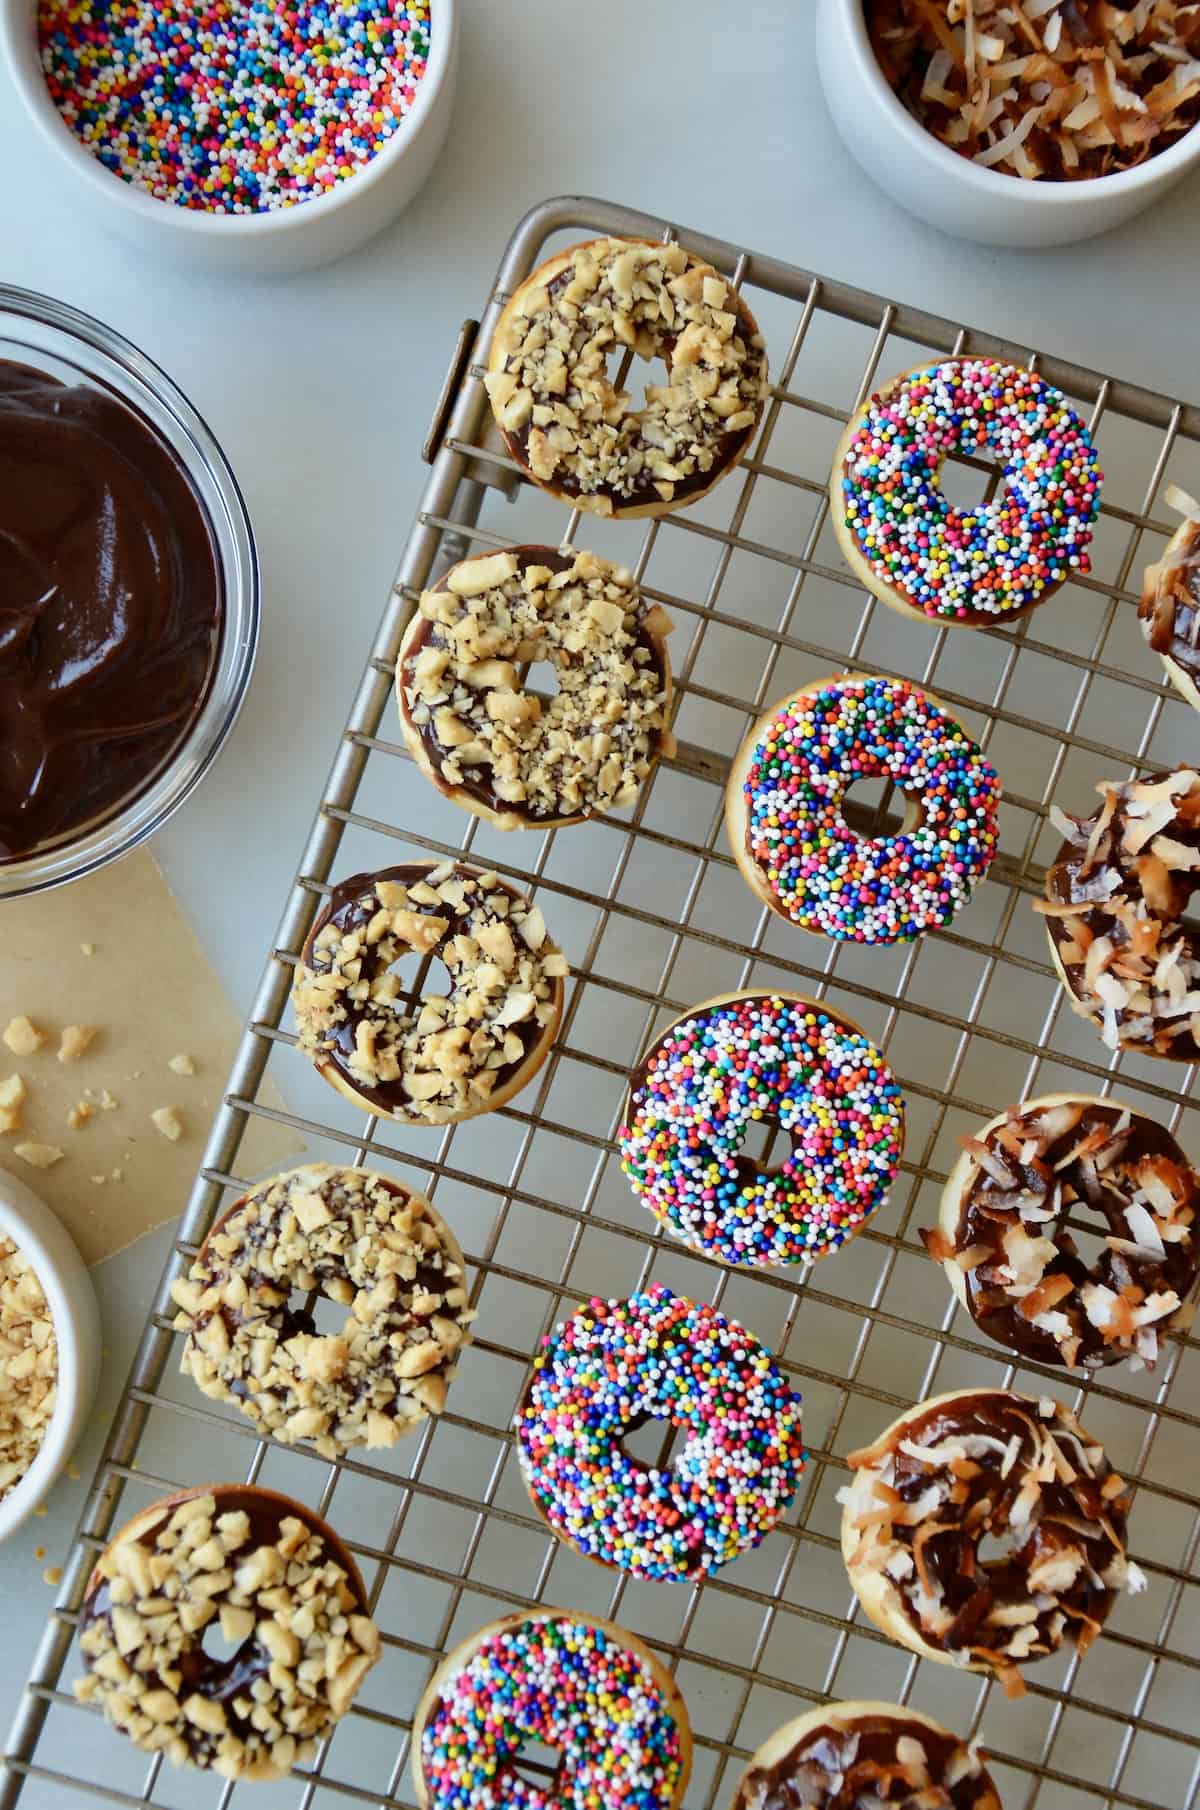 A cooling rack with baked and glazed doughnuts topped with chopped nuts, sprinkles and toasted coconut. Bowls with more toppings and Nutella glaze are beside the cooling rack.